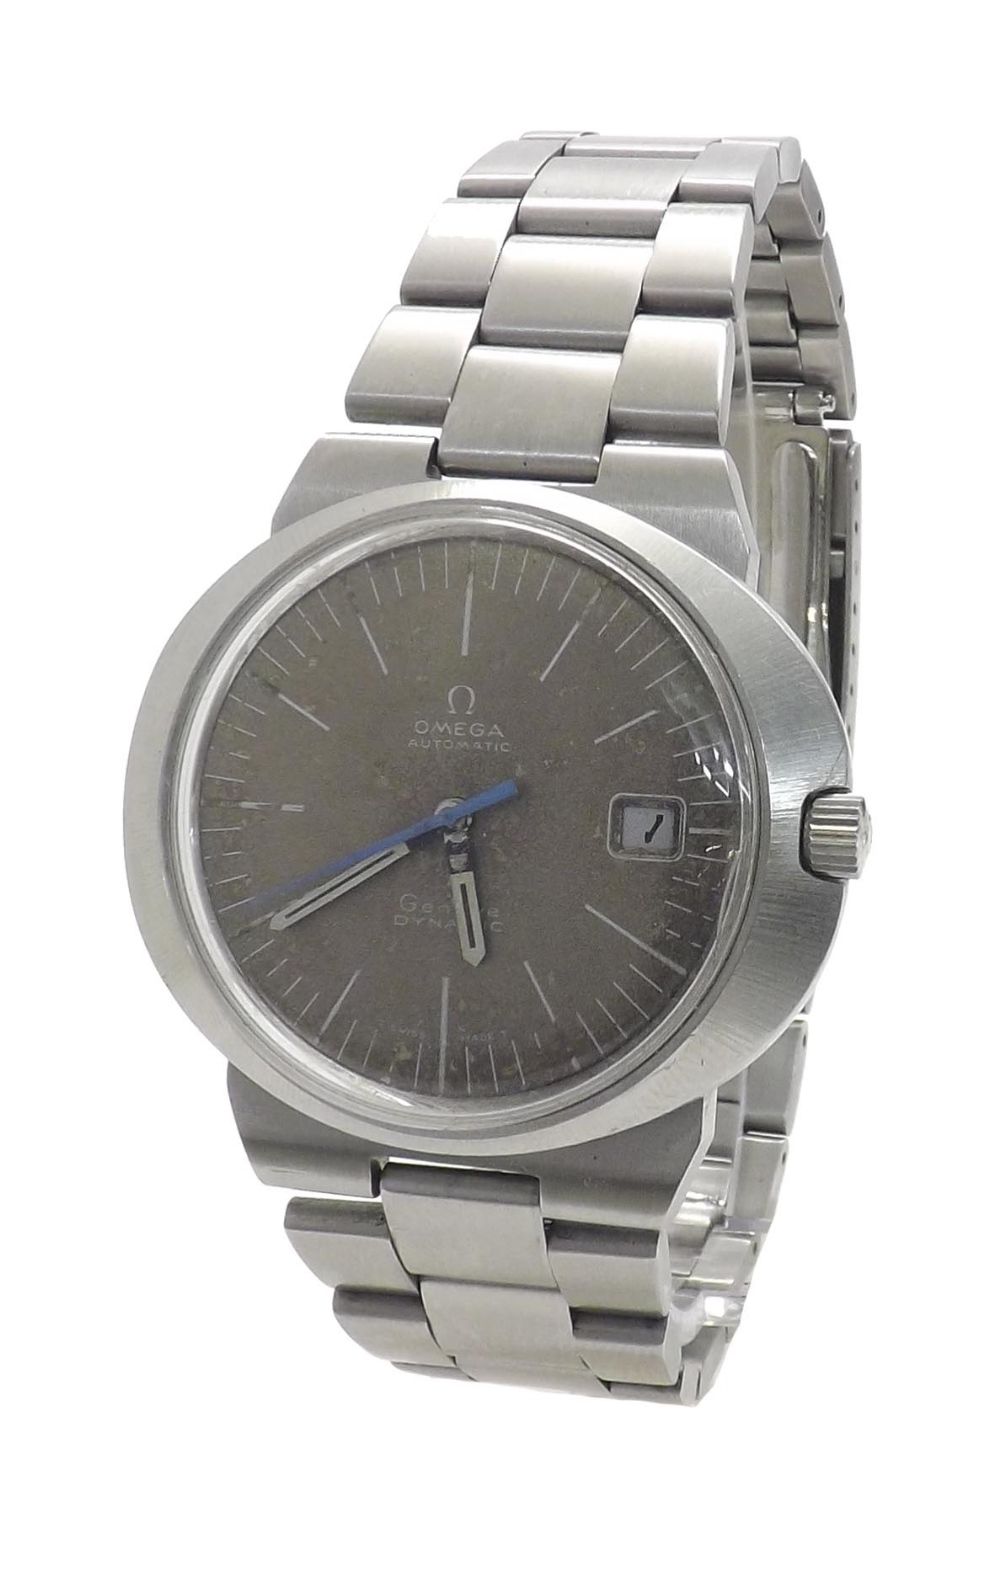 Omega Geneve Dynamic automatic stainless steel gentleman's bracelet watch, the gilt dial with